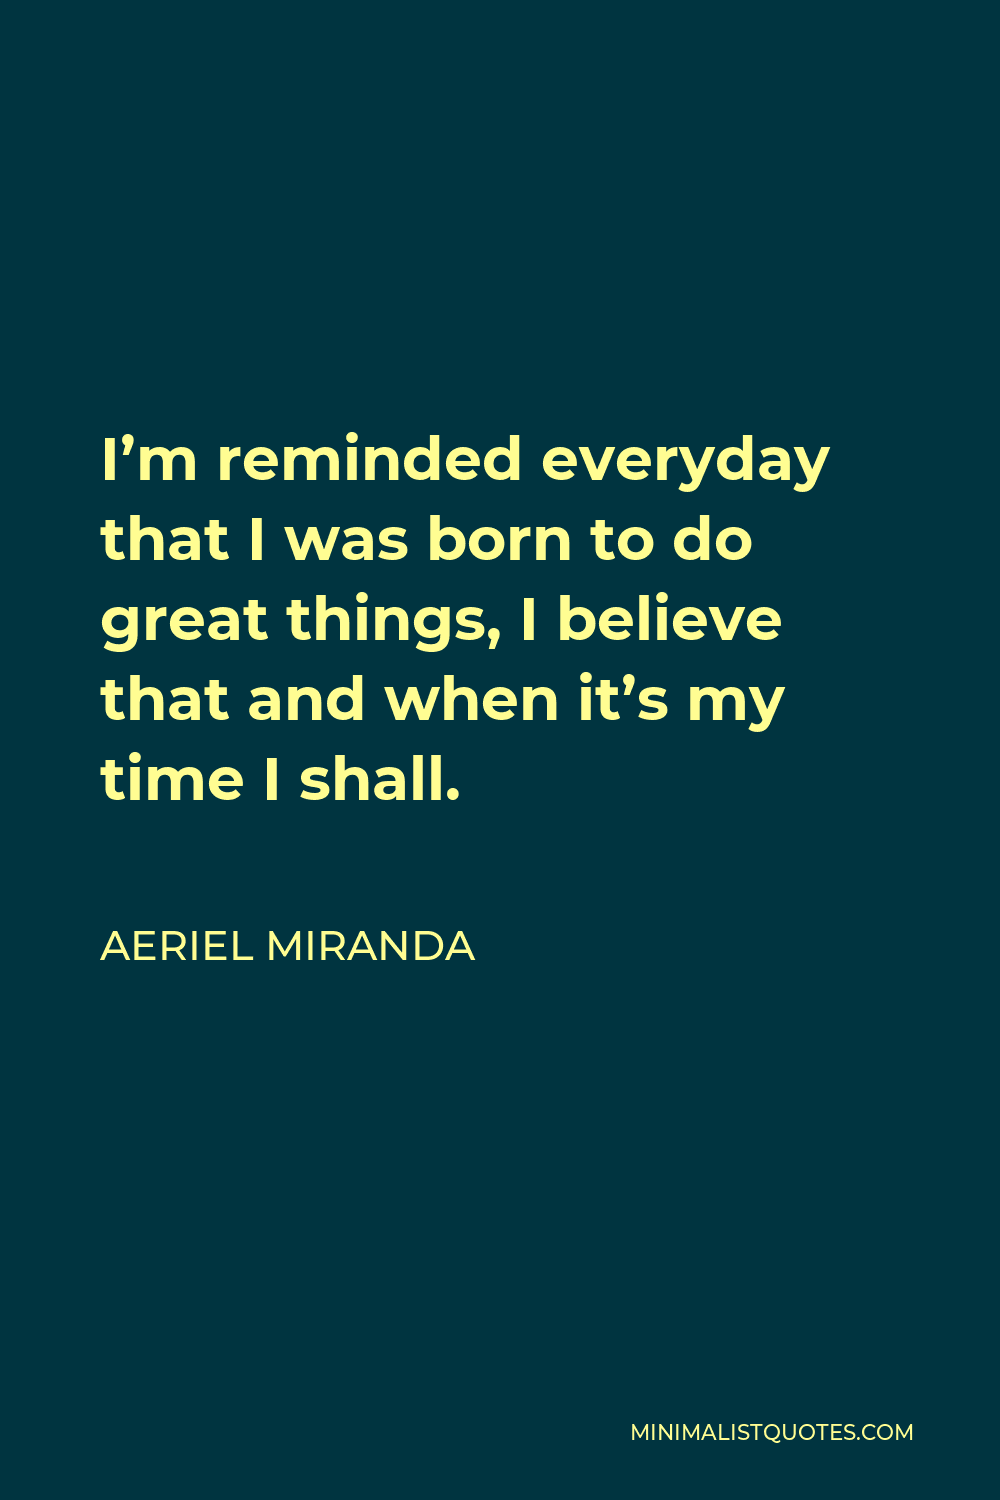 Aeriel Miranda Quote - I’m reminded everyday that I was born to do great things, I believe that and when it’s my time I shall.